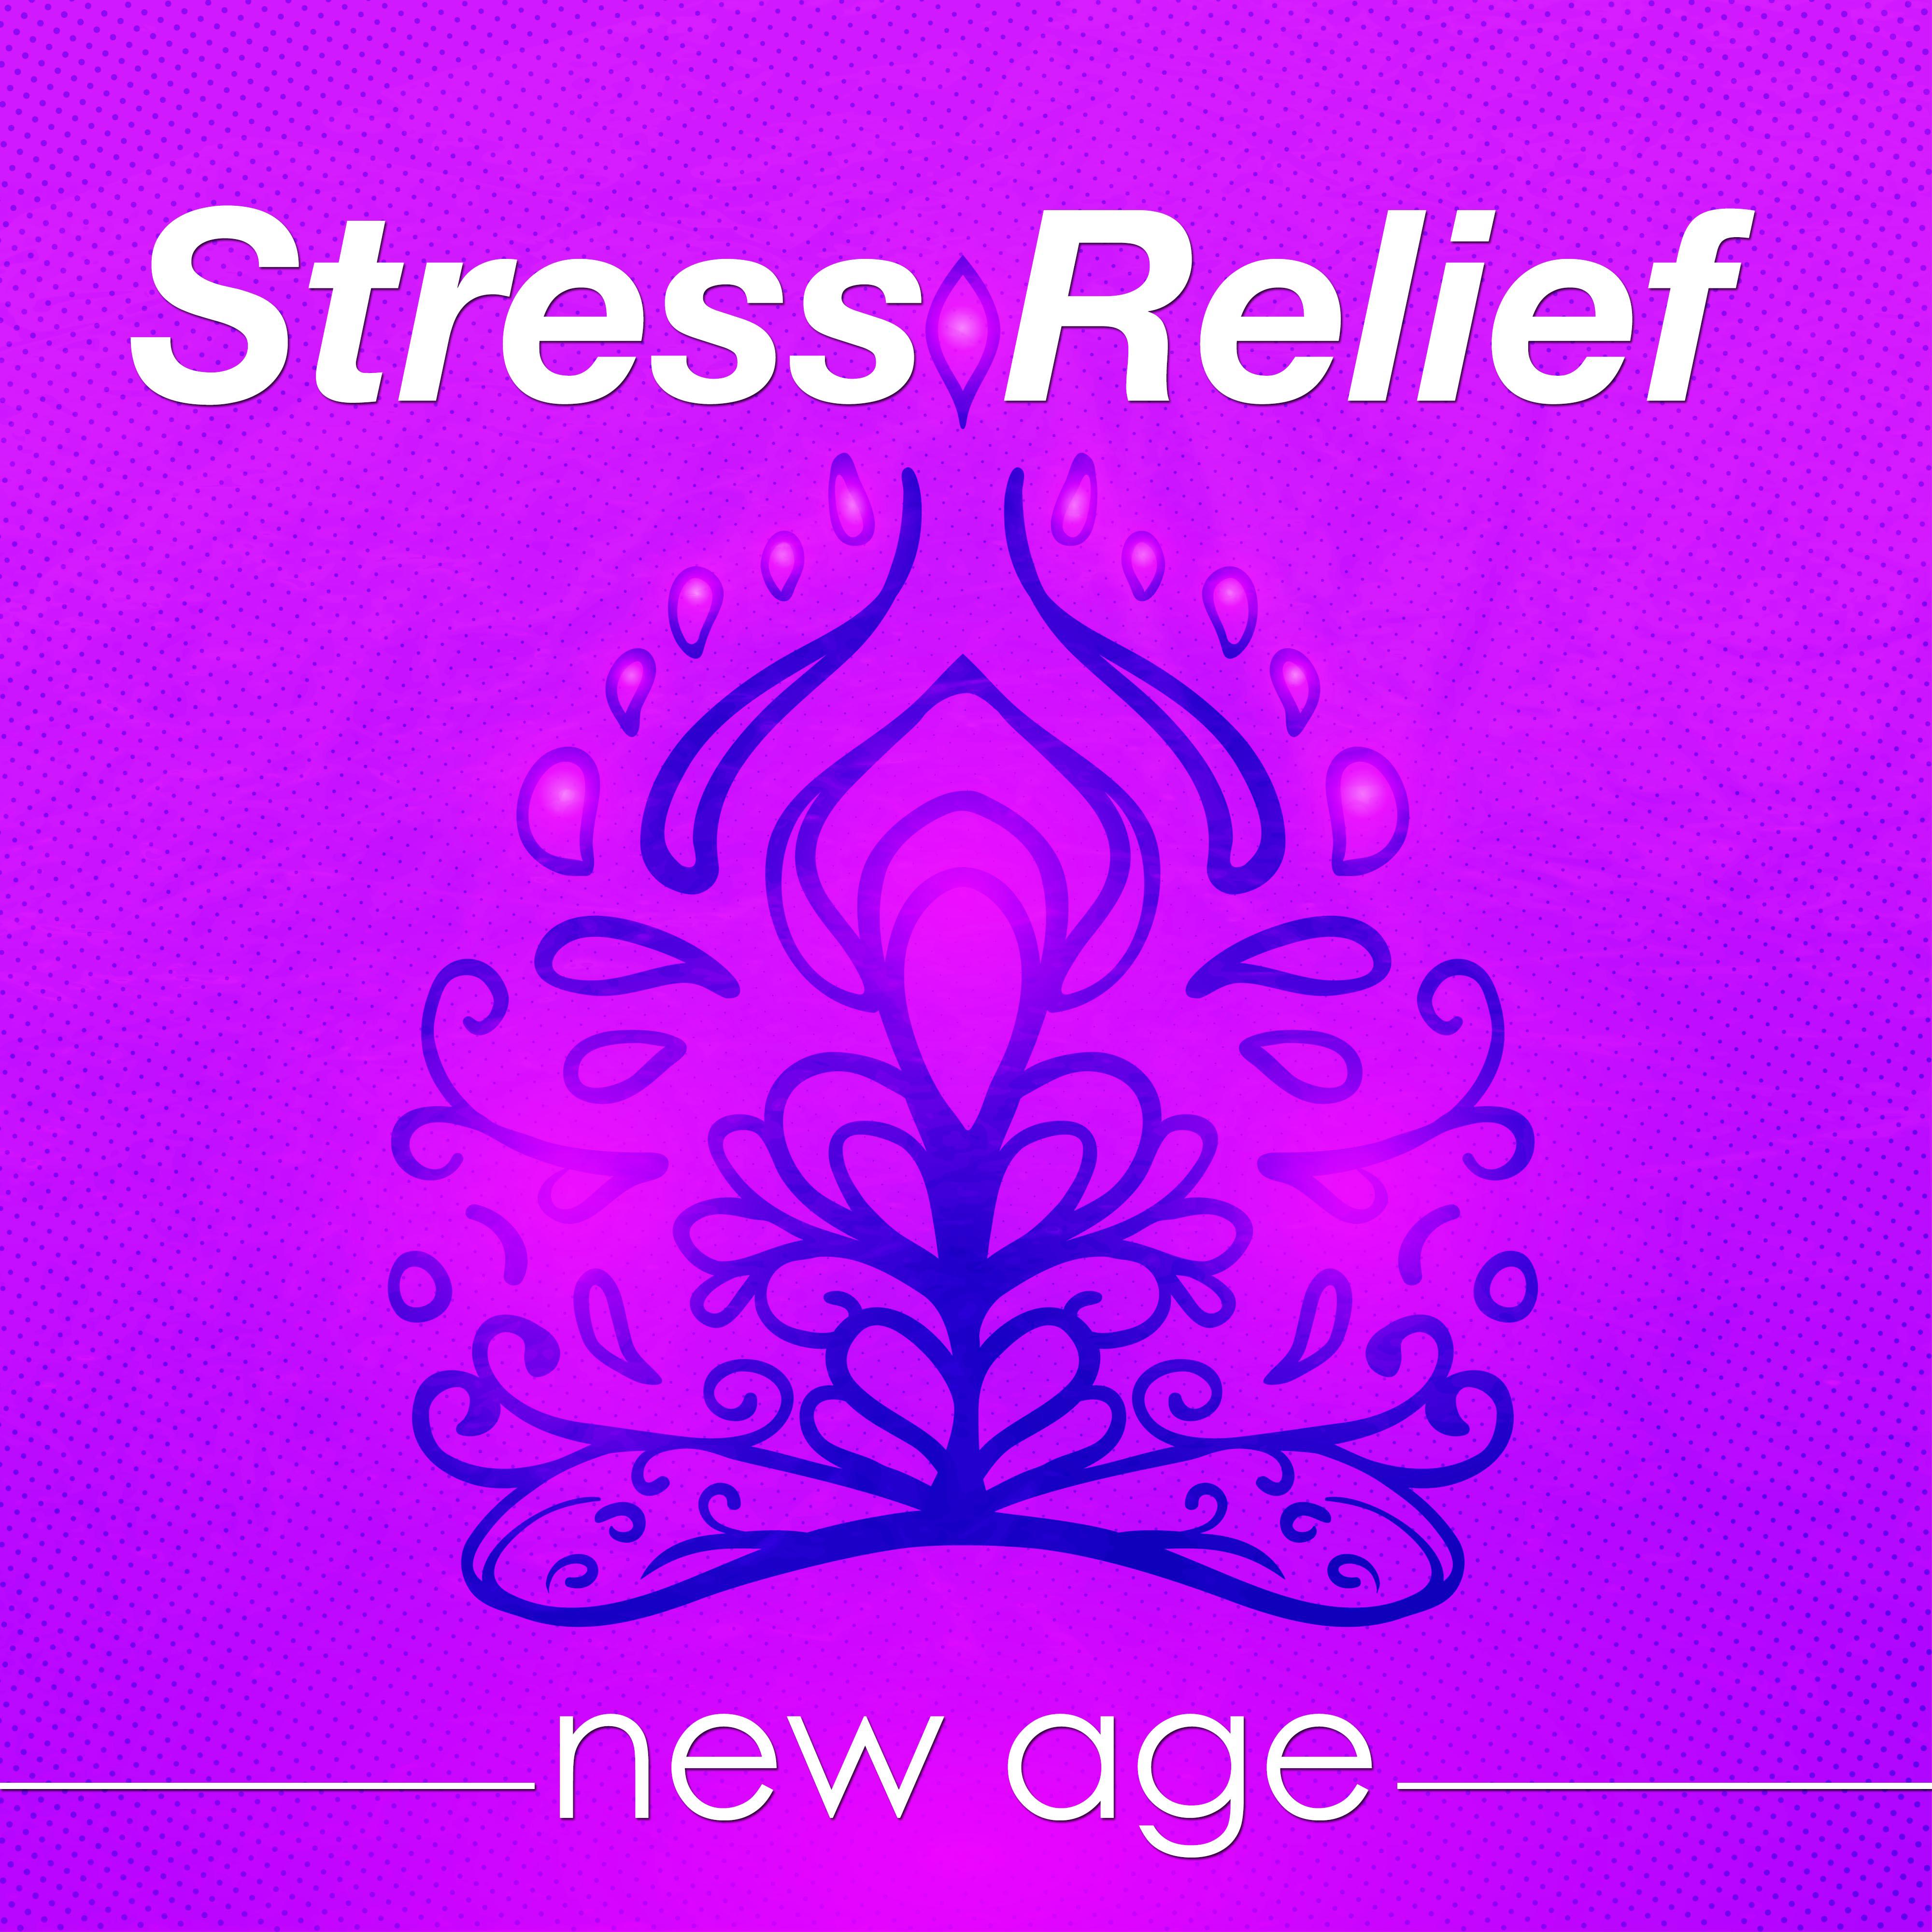 Stress Relief New Age - Soft and Calming Music with Nature Sounds for Anxiety, Stress and Anger